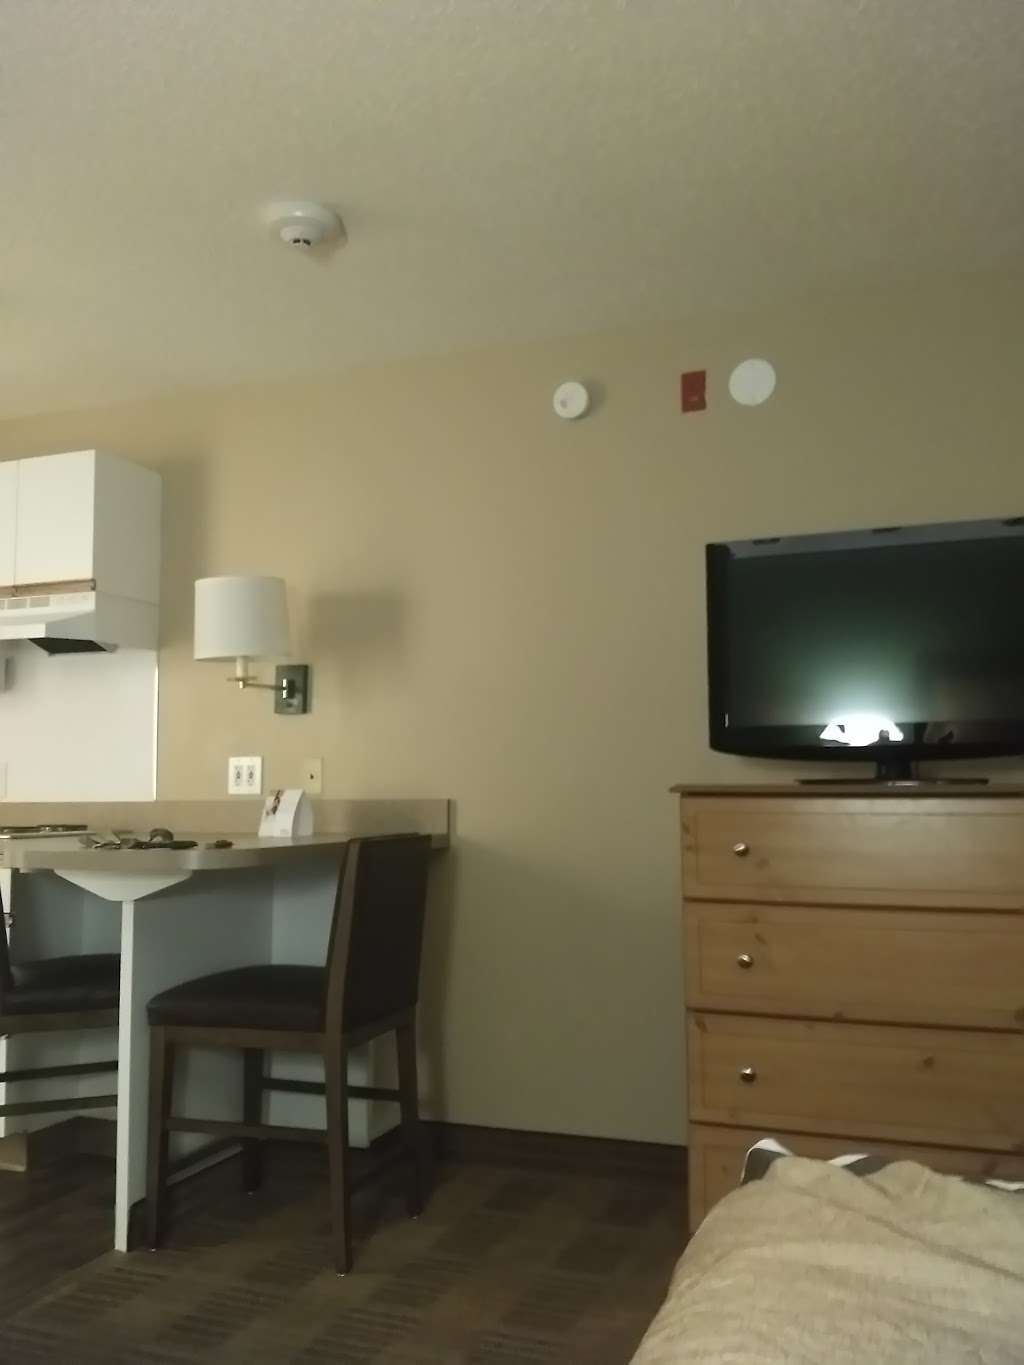 Extended Stay America - Washington D.C - Rockville | 2621 Research Blvd, Rockville, MD 20850, USA | Phone: (301) 987-9100